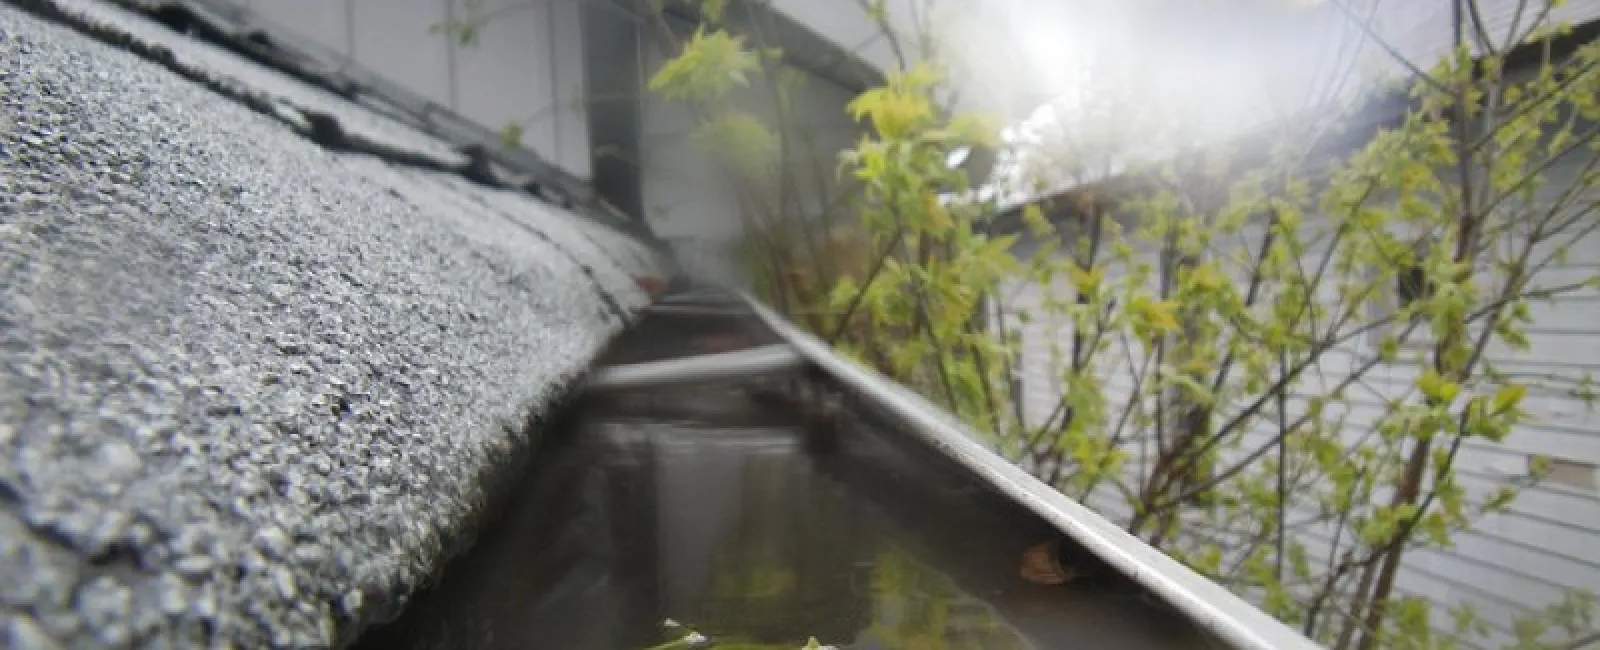 Types of Gutter Covers You Need to Know About